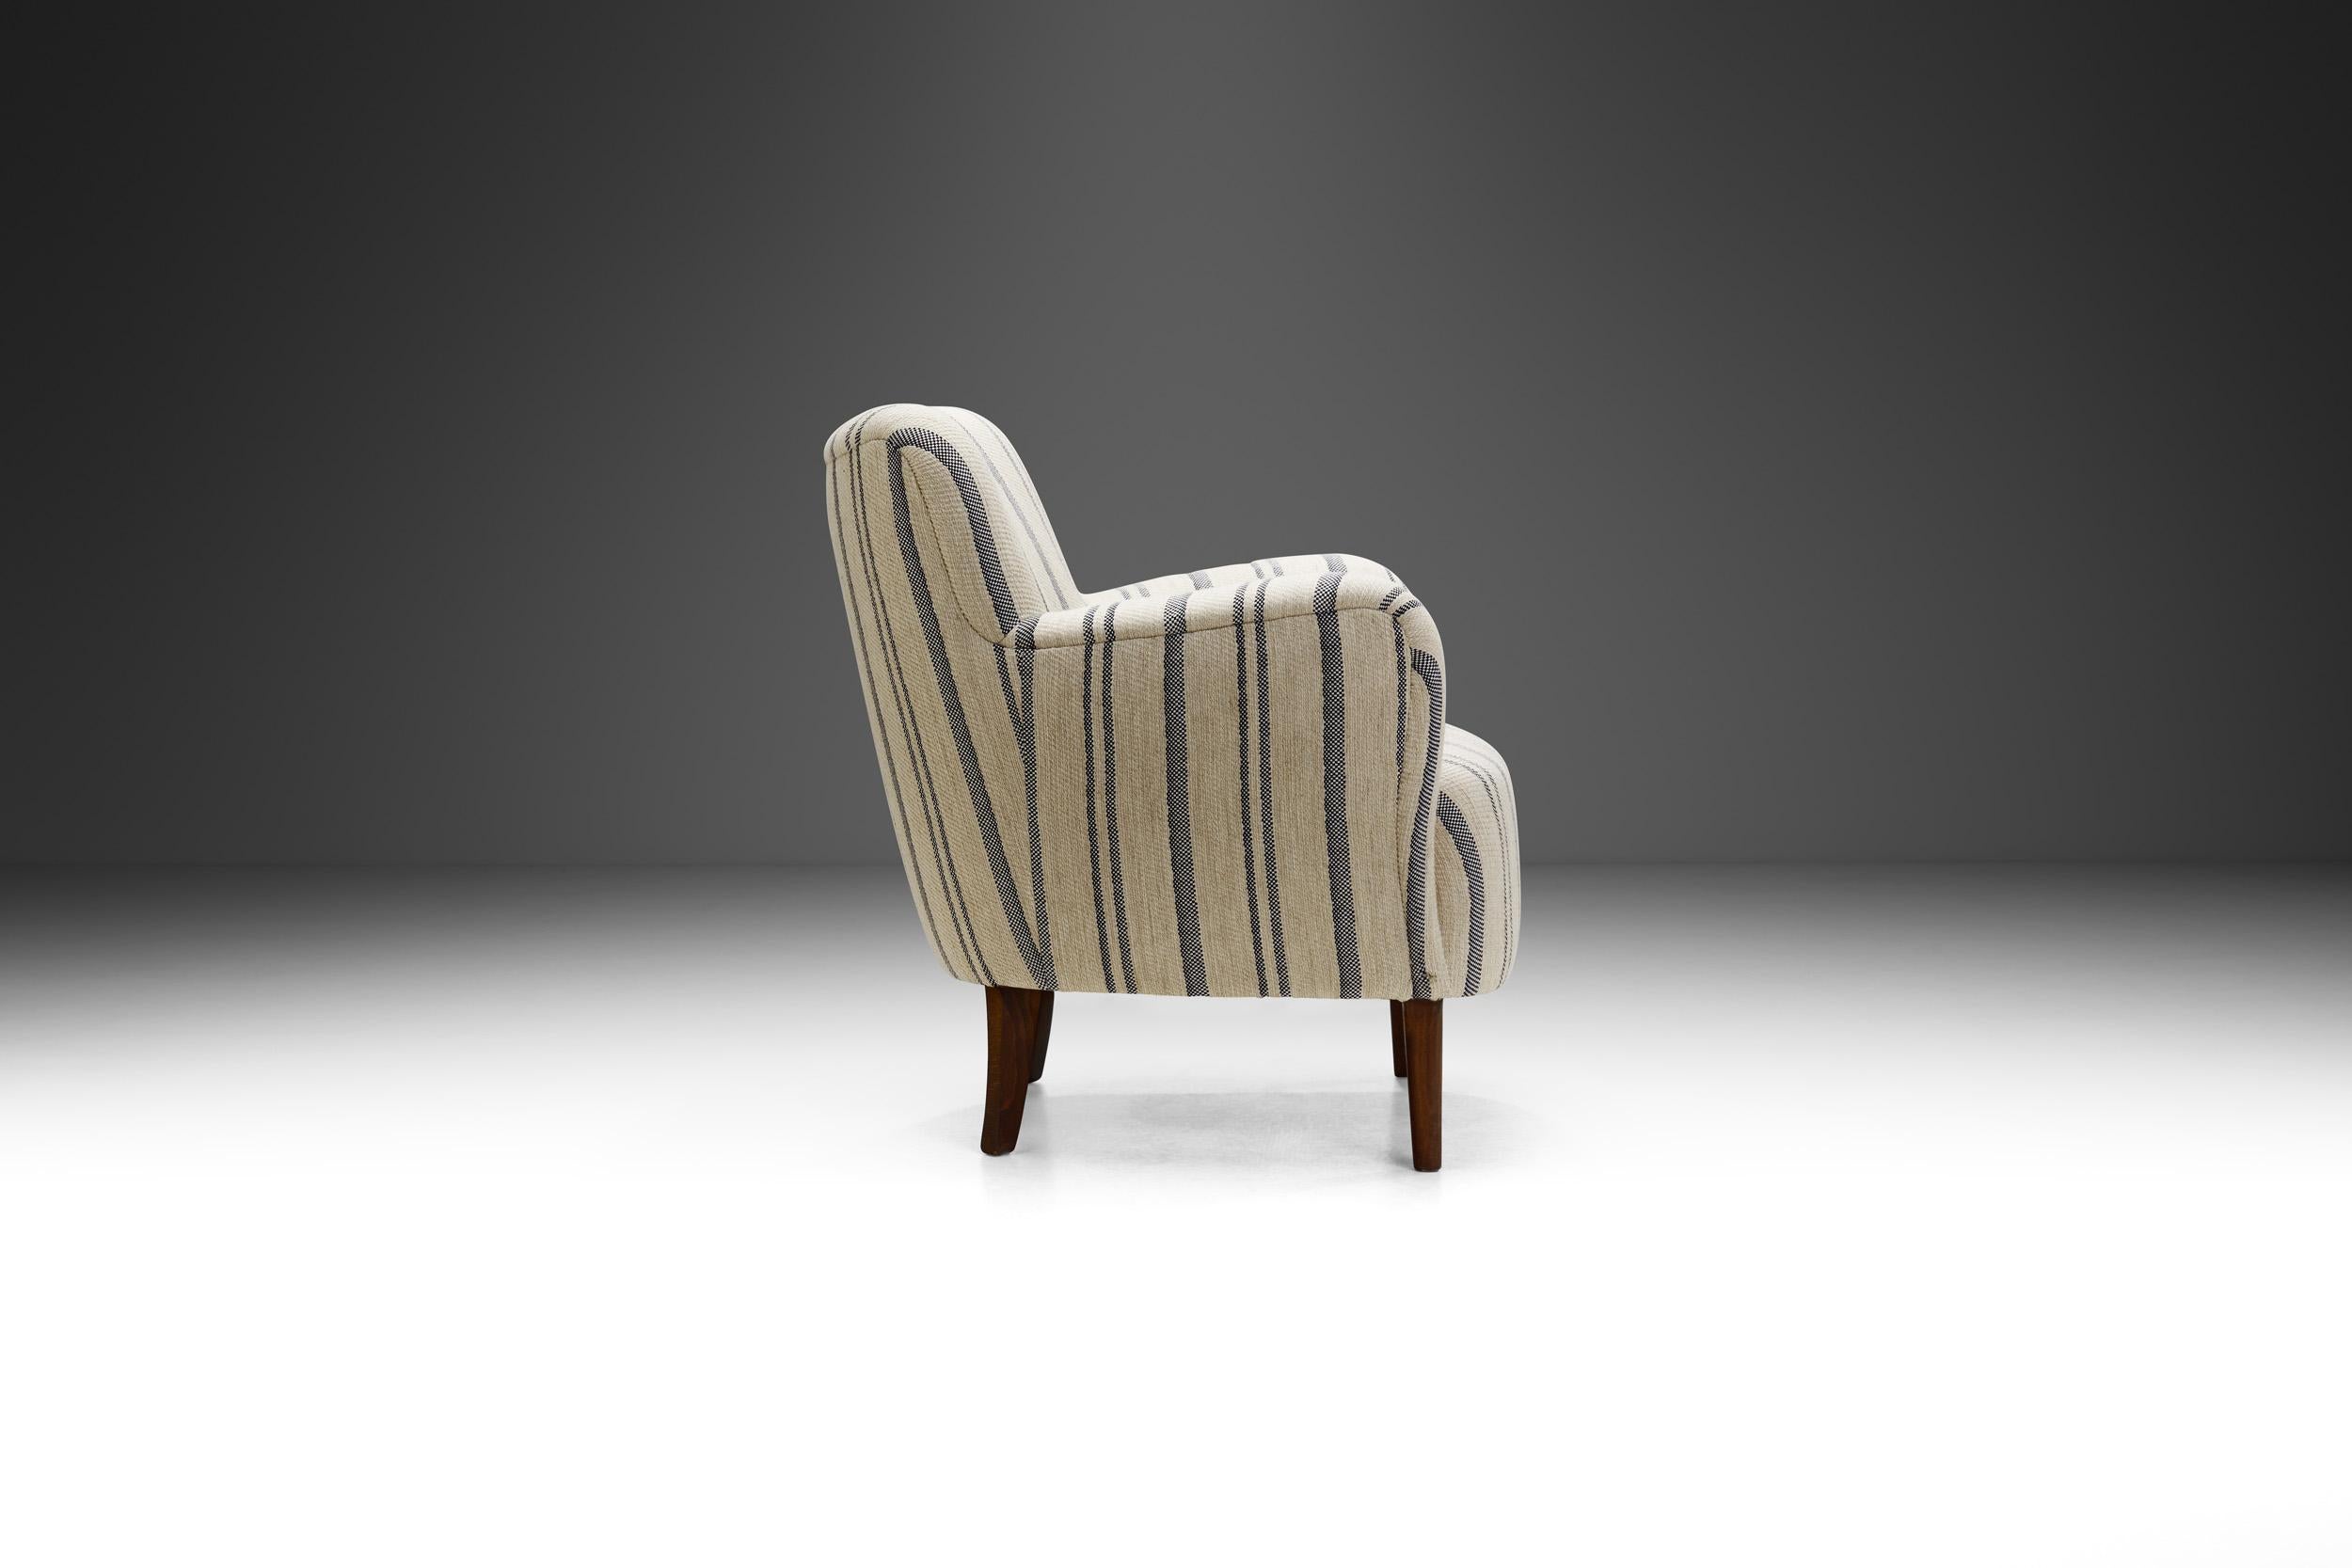 Mid-20th Century Mid-Century Modern Striped Lowback Easy Chair, Denmark ca 1940s For Sale